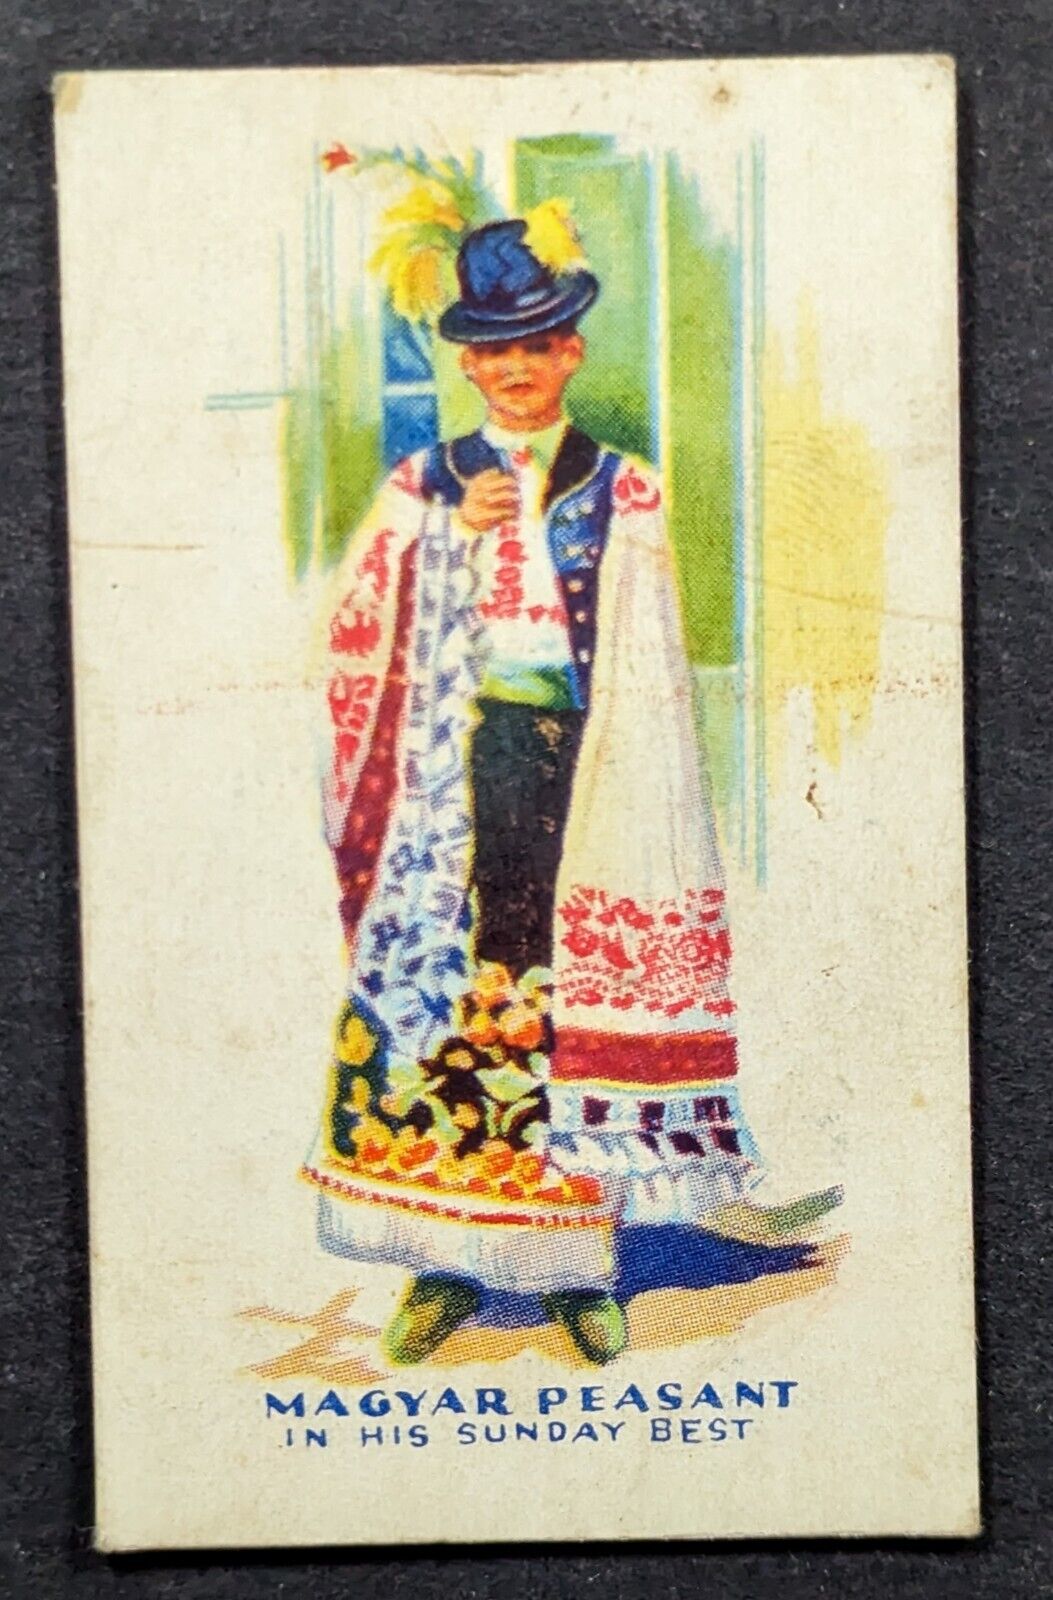 Vintage 1930s Magyar Peasant E196 Necco Candy Card #9